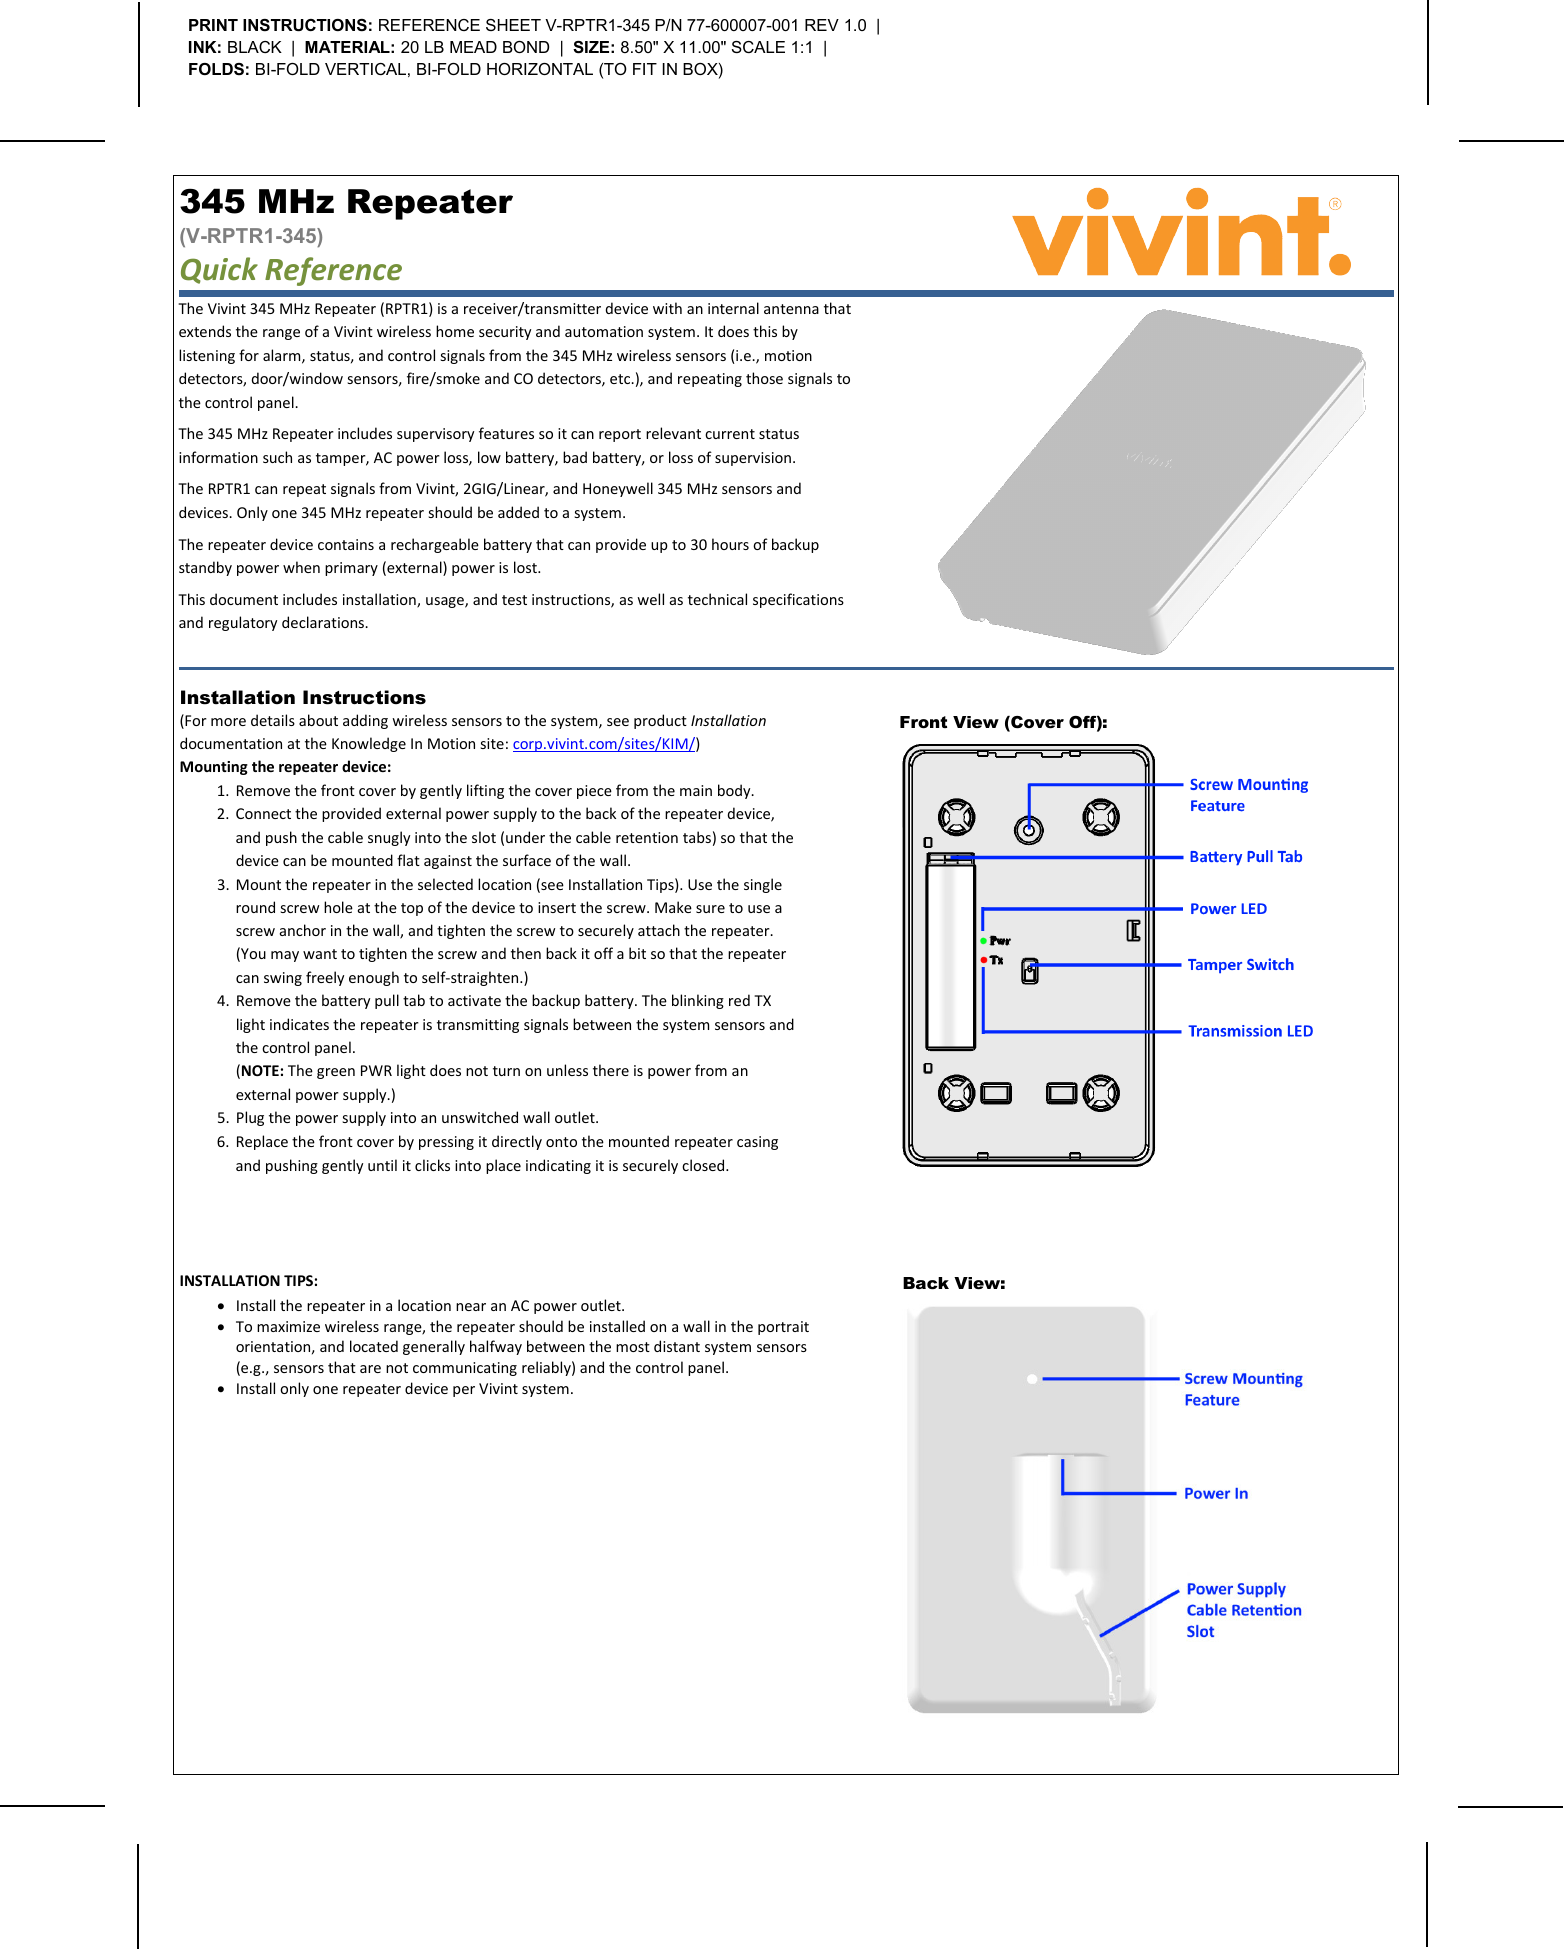       The Vivint 345 MHz Repeater (RPTR1) is a receiver/transmitter device with an internal antenna that extends the range of a Vivint wireless home security and automation system. It does this by listening for alarm, status, and control signals from the 345 MHz wireless sensors (i.e., motion detectors, door/window sensors, fire/smoke and CO detectors, etc.), and repeating those signals to the control panel. The 345 MHz Repeater includes supervisory features so it can report relevant current status information such as tamper, AC power loss, low battery, bad battery, or loss of supervision. The RPTR1 can repeat signals from Vivint, 2GIG/Linear, and Honeywell 345 MHz sensors and devices. Only one 345 MHz repeater should be added to a system. The repeater device contains a rechargeable battery that can provide up to 30 hours of backup standby power when primary (external) power is lost. This document includes installation, usage, and test instructions, as well as technical specifications and regulatory declarations. 345 MHz Repeater  (V-RPTR1-345) Quick Reference   PRINT INSTRUCTIONS: REFERENCE SHEET V-RPTR1-345 P/N 77-600007-001 REV 1.0  |  INK: BLACK  |  MATERIAL: 20 LB MEAD BOND  |  SIZE: 8.50&quot; X 11.00&quot; SCALE 1:1  |  FOLDS: BI-FOLD VERTICAL, BI-FOLD HORIZONTAL (TO FIT IN BOX) Front View (Cover Off):   Installation Instructions  (For more details about adding wireless sensors to the system, see product Installation documentation at the Knowledge In Motion site: corp.vivint.com/sites/KIM/) Mounting the repeater device: 1. Remove the front cover by gently lifting the cover piece from the main body. 2. Connect the provided external power supply to the back of the repeater device, and push the cable snugly into the slot (under the cable retention tabs) so that the device can be mounted flat against the surface of the wall. 3. Mount the repeater in the selected location (see Installation Tips). Use the single round screw hole at the top of the device to insert the screw. Make sure to use a screw anchor in the wall, and tighten the screw to securely attach the repeater.  (You may want to tighten the screw and then back it off a bit so that the repeater can swing freely enough to self-straighten.) 4. Remove the battery pull tab to activate the backup battery. The blinking red TX light indicates the repeater is transmitting signals between the system sensors and the control panel.  (NOTE: The green PWR light does not turn on unless there is power from an external power supply.) 5. Plug the power supply into an unswitched wall outlet. 6. Replace the front cover by pressing it directly onto the mounted repeater casing and pushing gently until it clicks into place indicating it is securely closed. INSTALLATION TIPS: • Install the repeater in a location near an AC power outlet. • To maximize wireless range, the repeater should be installed on a wall in the portrait orientation, and located generally halfway between the most distant system sensors (e.g., sensors that are not communicating reliably) and the control panel. • Install only one repeater device per Vivint system.  Back View:   